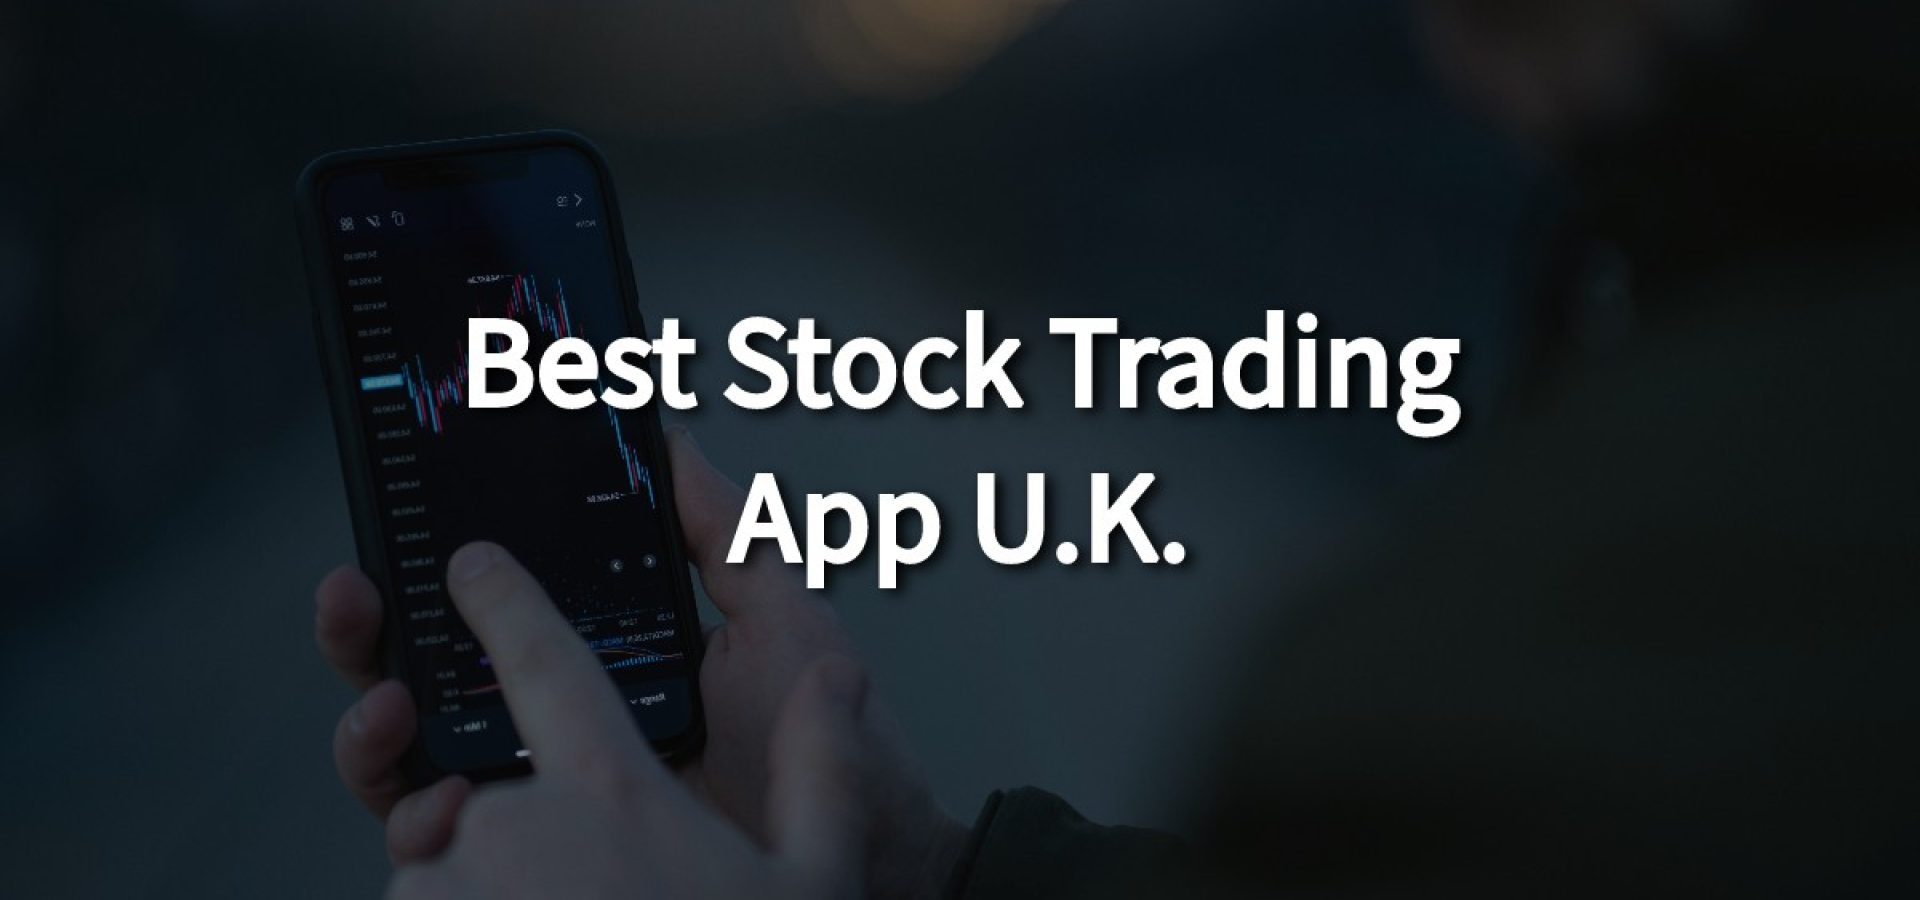 Best stock trading app U.K. you should know about in 2023